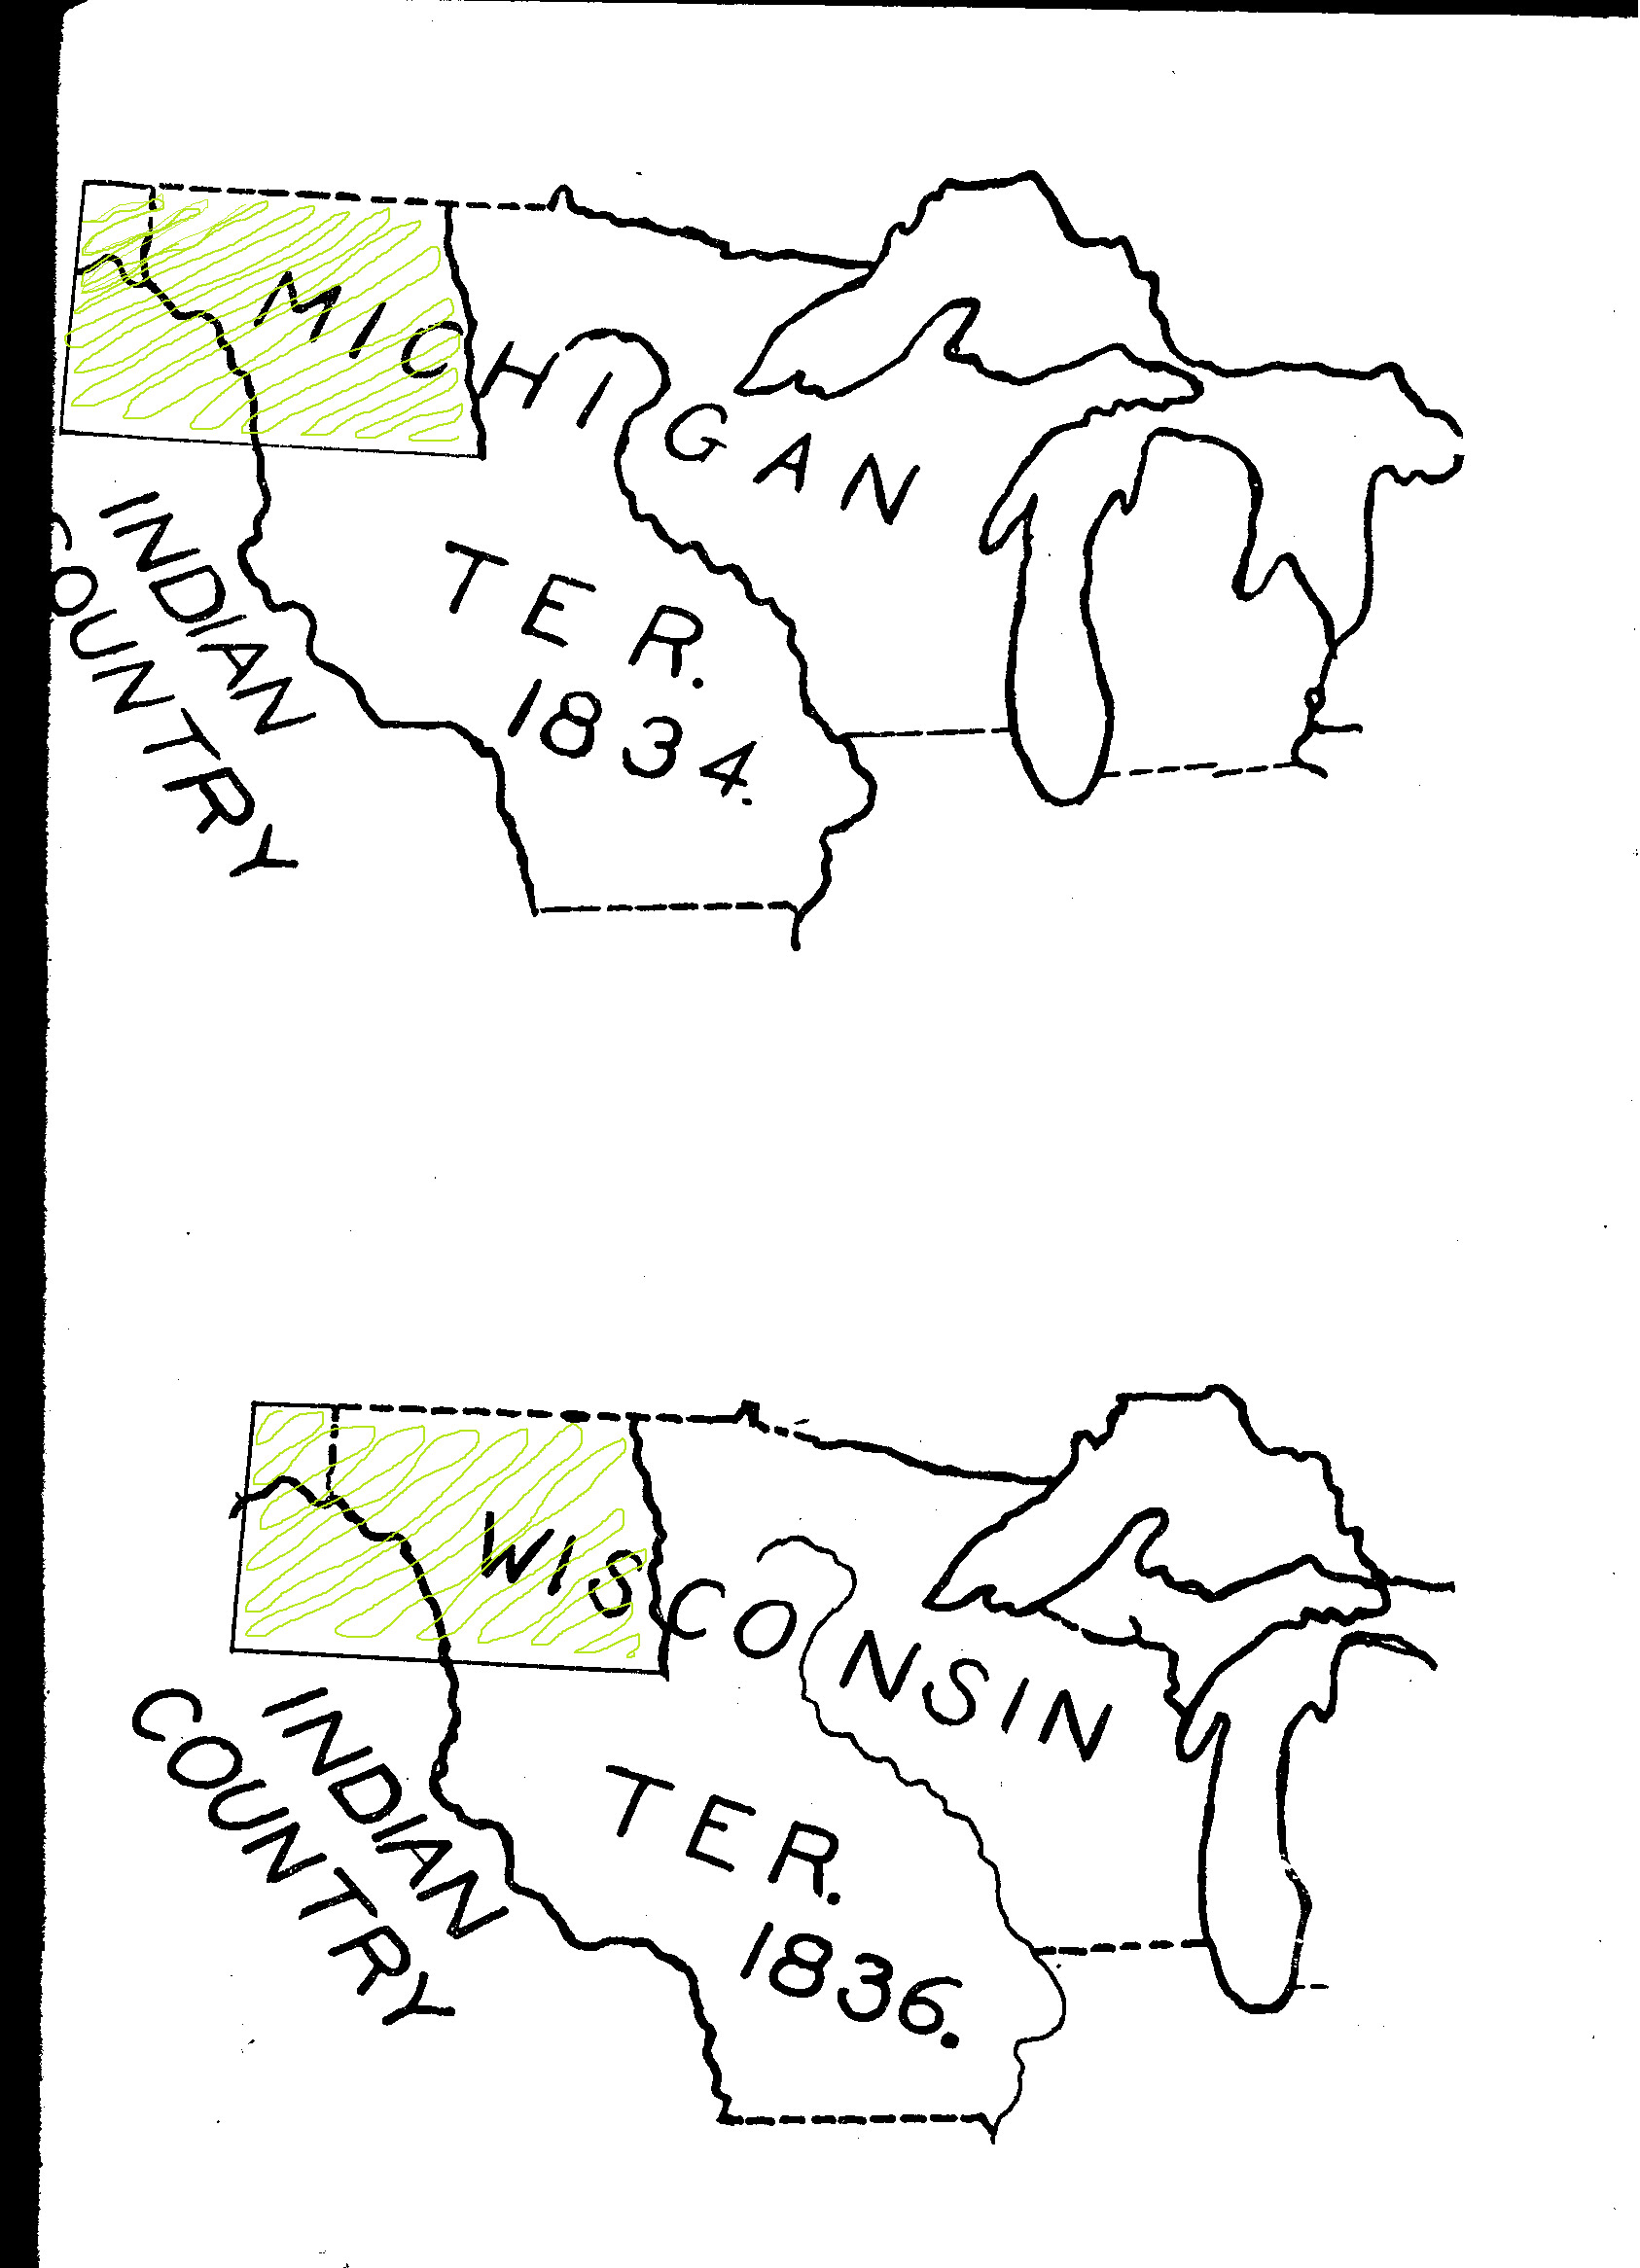 These two maps show how quickly territories took shape. As Michigan prepared to become a state (1837), the territory’s western portion was re-assigned to Wisconsin.